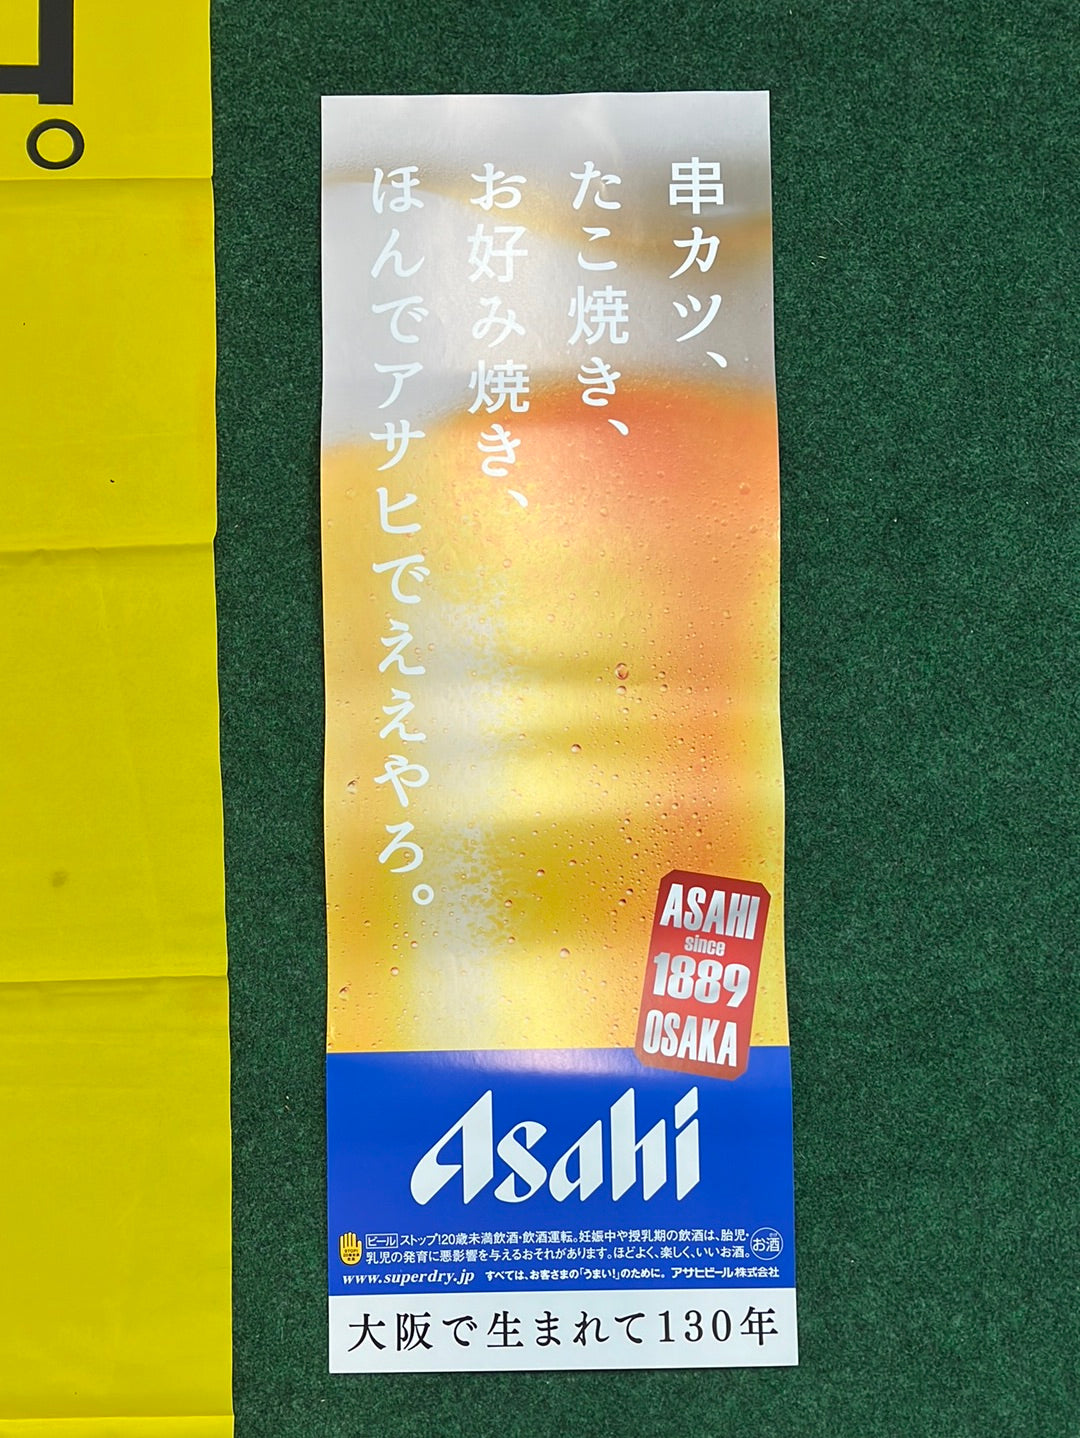 ASAHI Super Dry -Poster and "This Taste Is Dry" Advertising Nobori